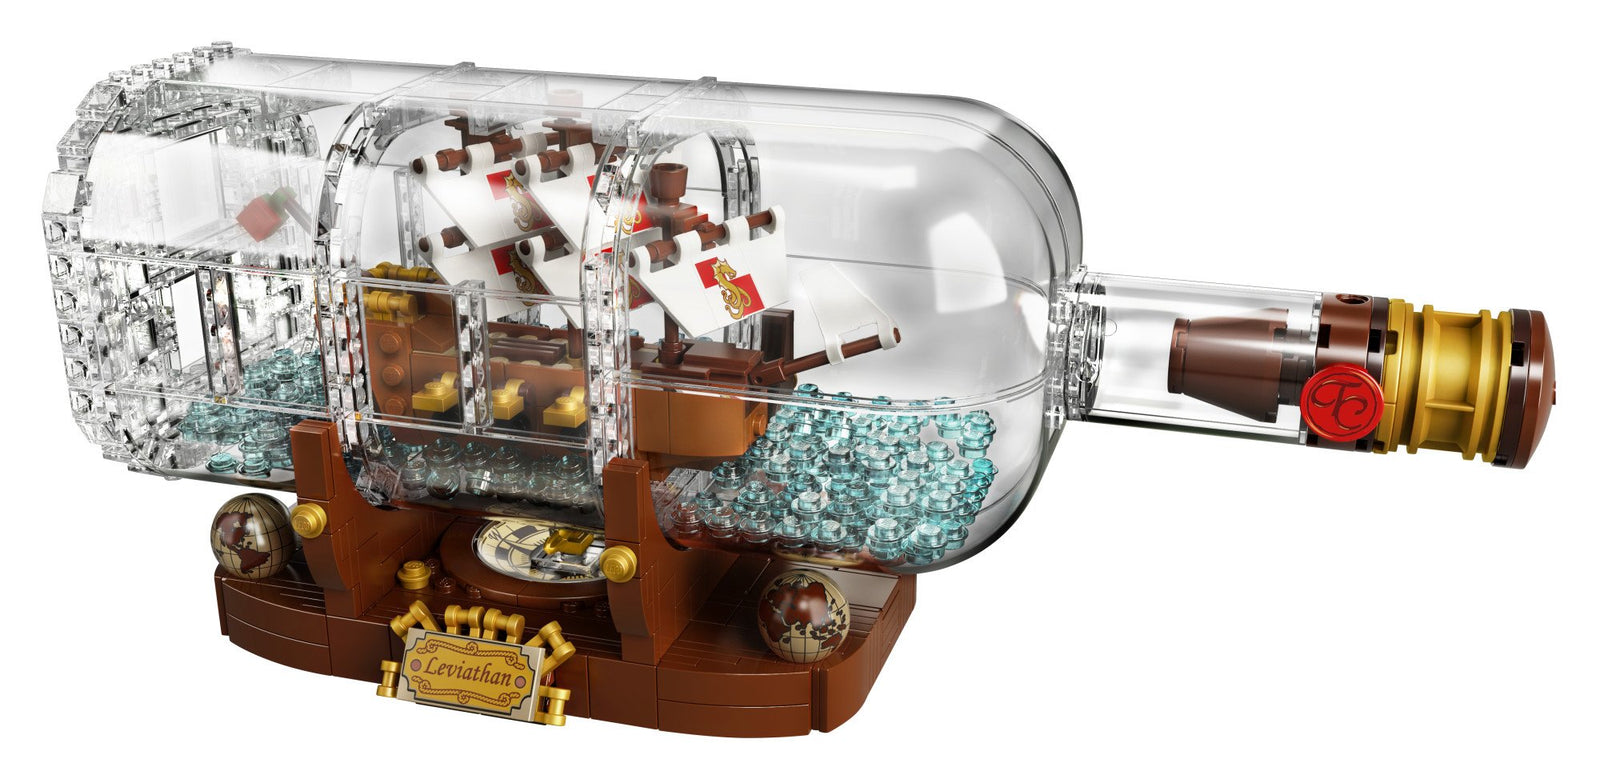 LEGO Ideas Ship in a Bottle 92177 Expert Building Kit, Snap Together Model Ship, Collectible Display Set and Toy for Adults (962 Pieces)